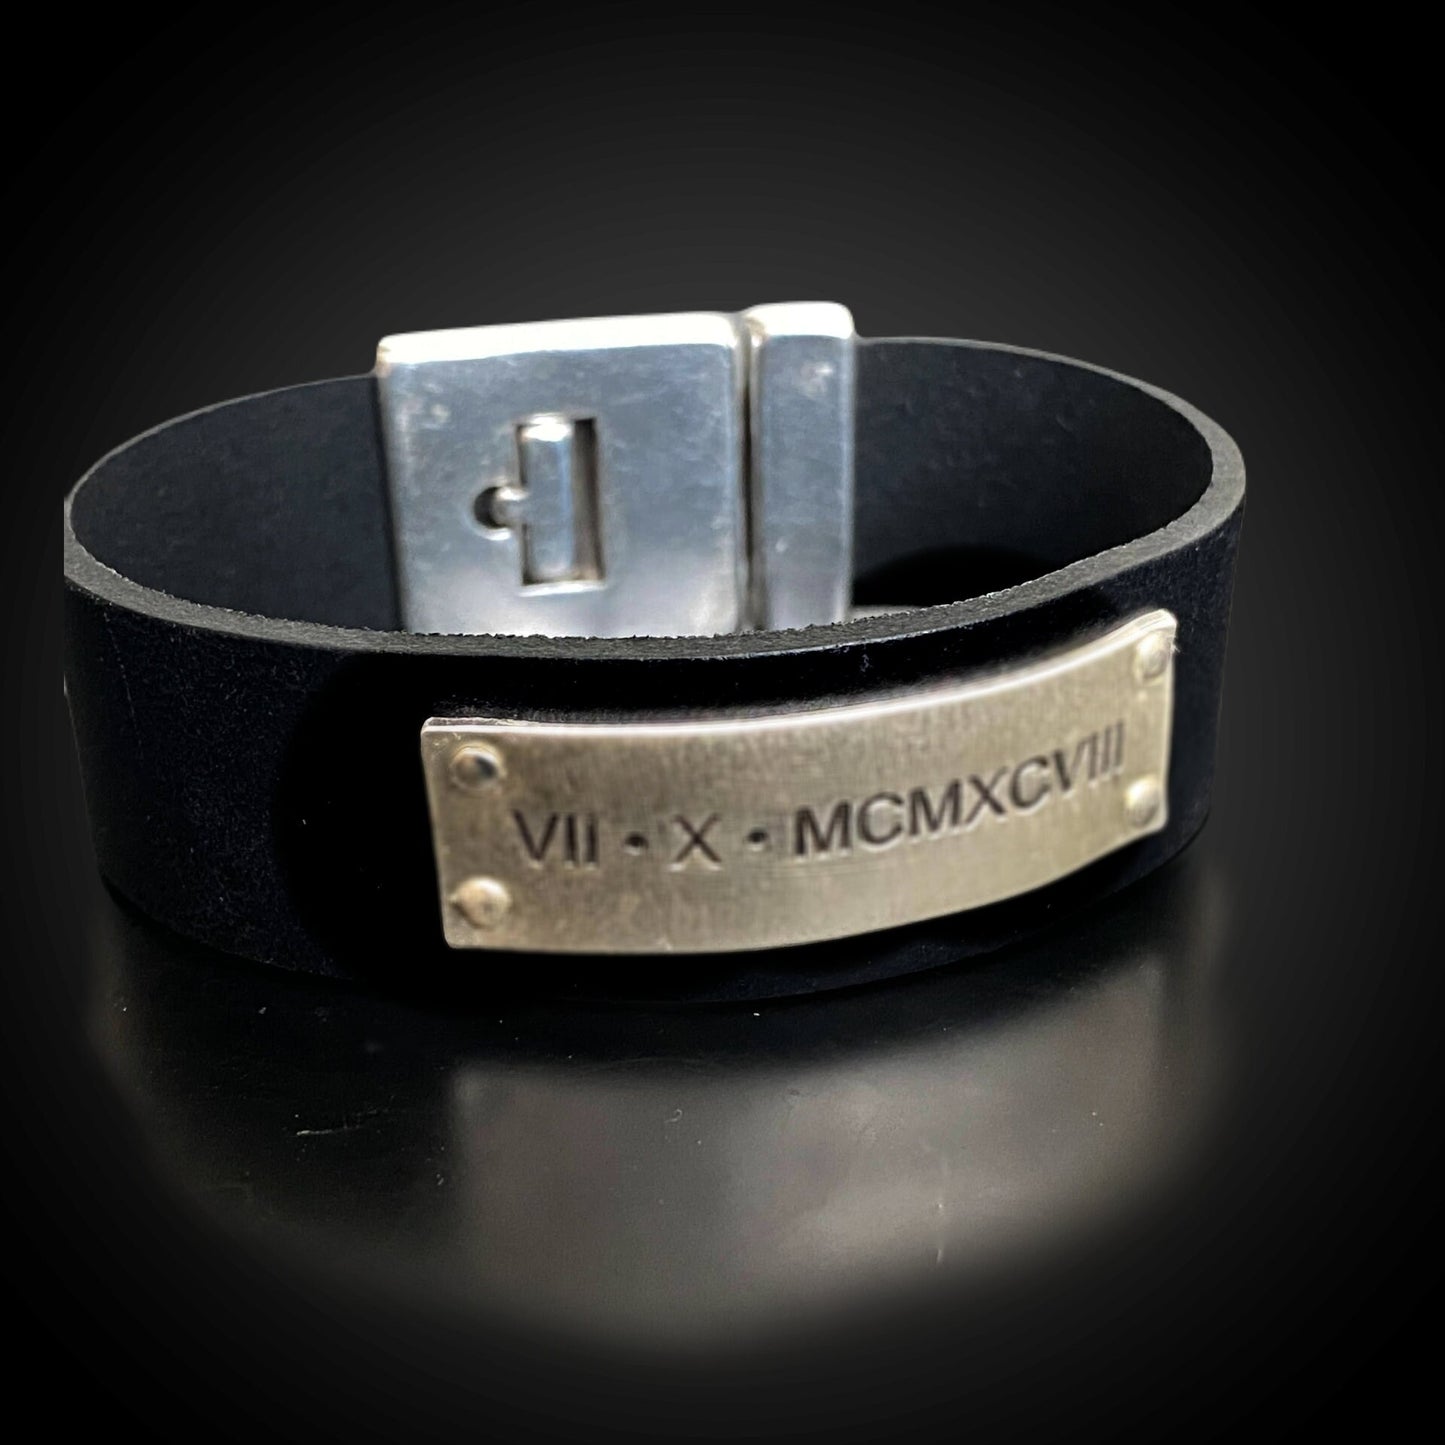 Leather Wide Band Bracelet w/ Sterling Silver Personalization Plate